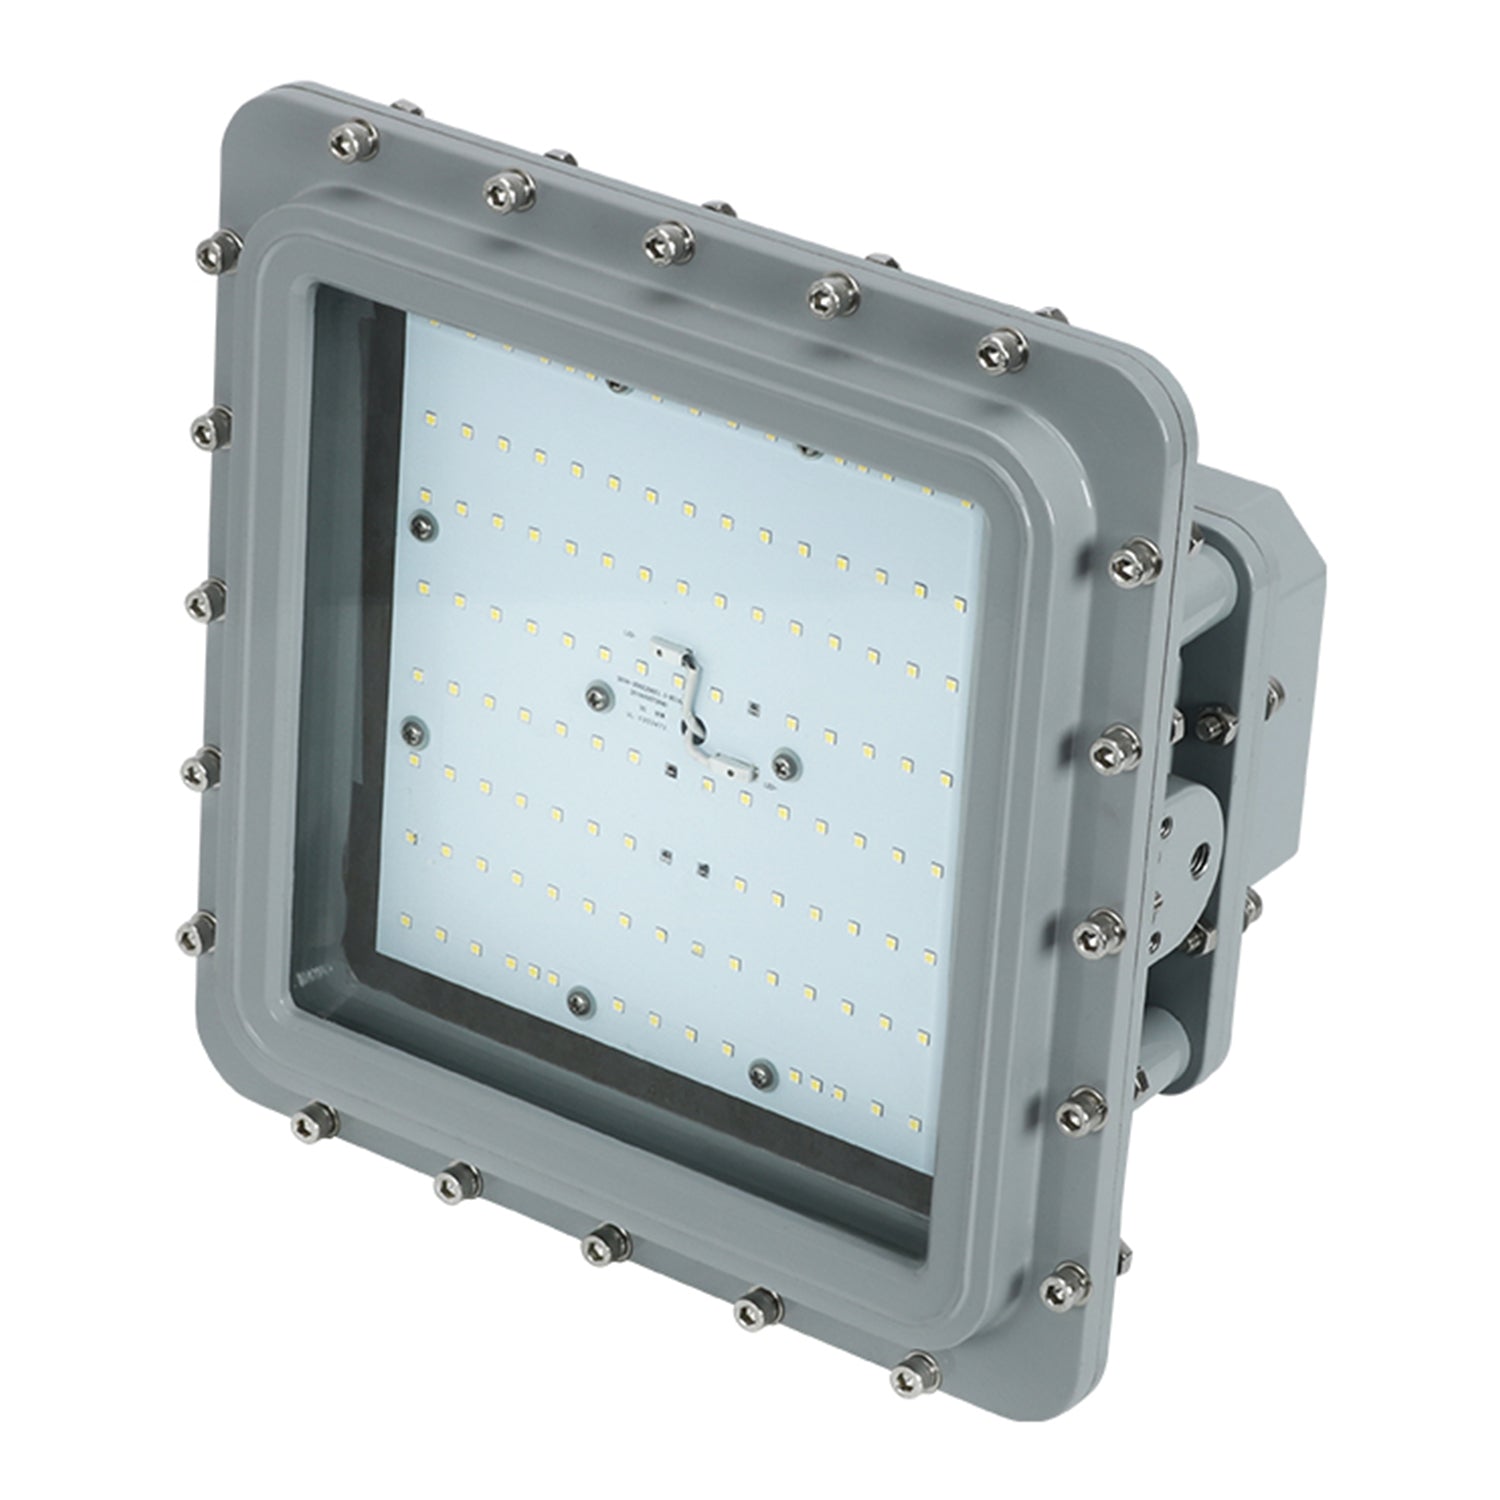 D Series 150W Non-Dimmable LED Explosion Proof Flood Light: High-Intensity Lighting Solution for Hazardous Locations with 20250LM and IP66 Protection, Ideal for Industrial Environments